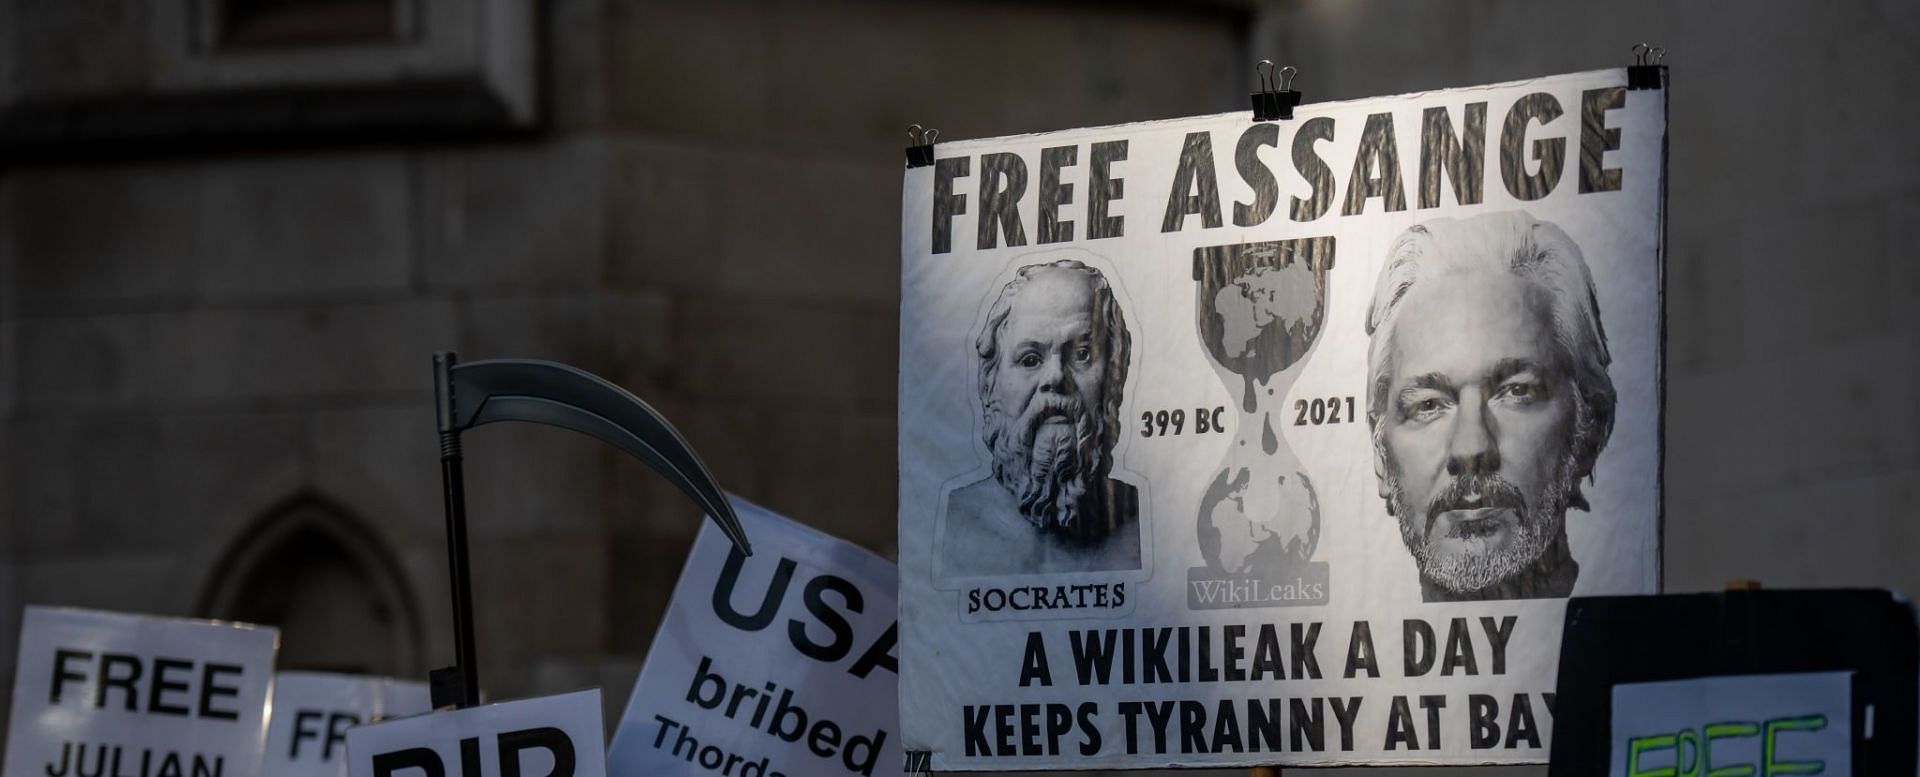 Julian Assange has been detained in London&#039;s high-security Belmarsh Prison ever since 2019 (Image via Chris J Radcliffe/Getty Images)